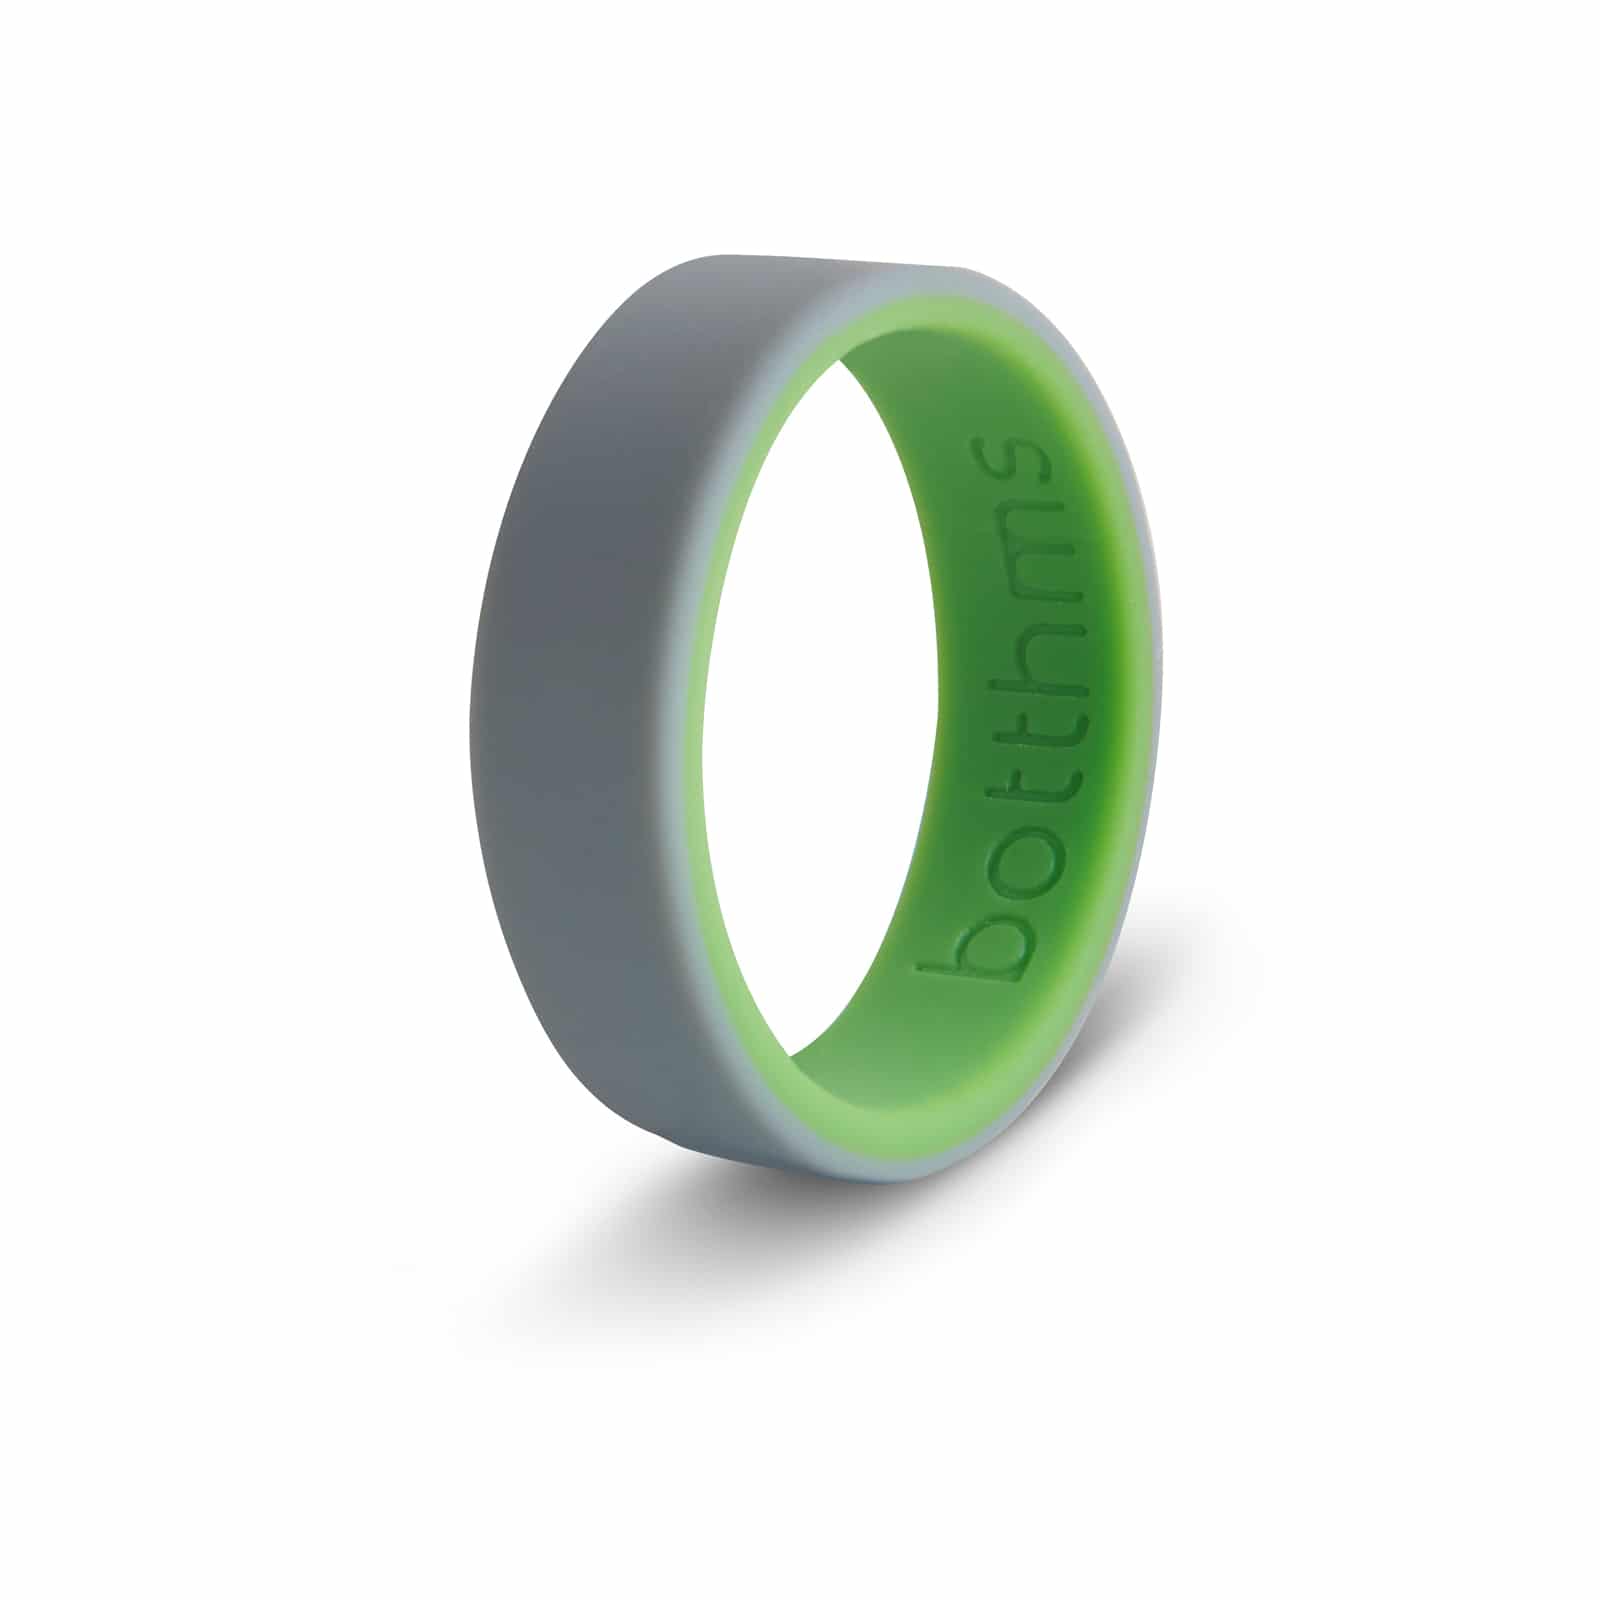 botthms botthms Double Green Silicone Ring Silicone Rings